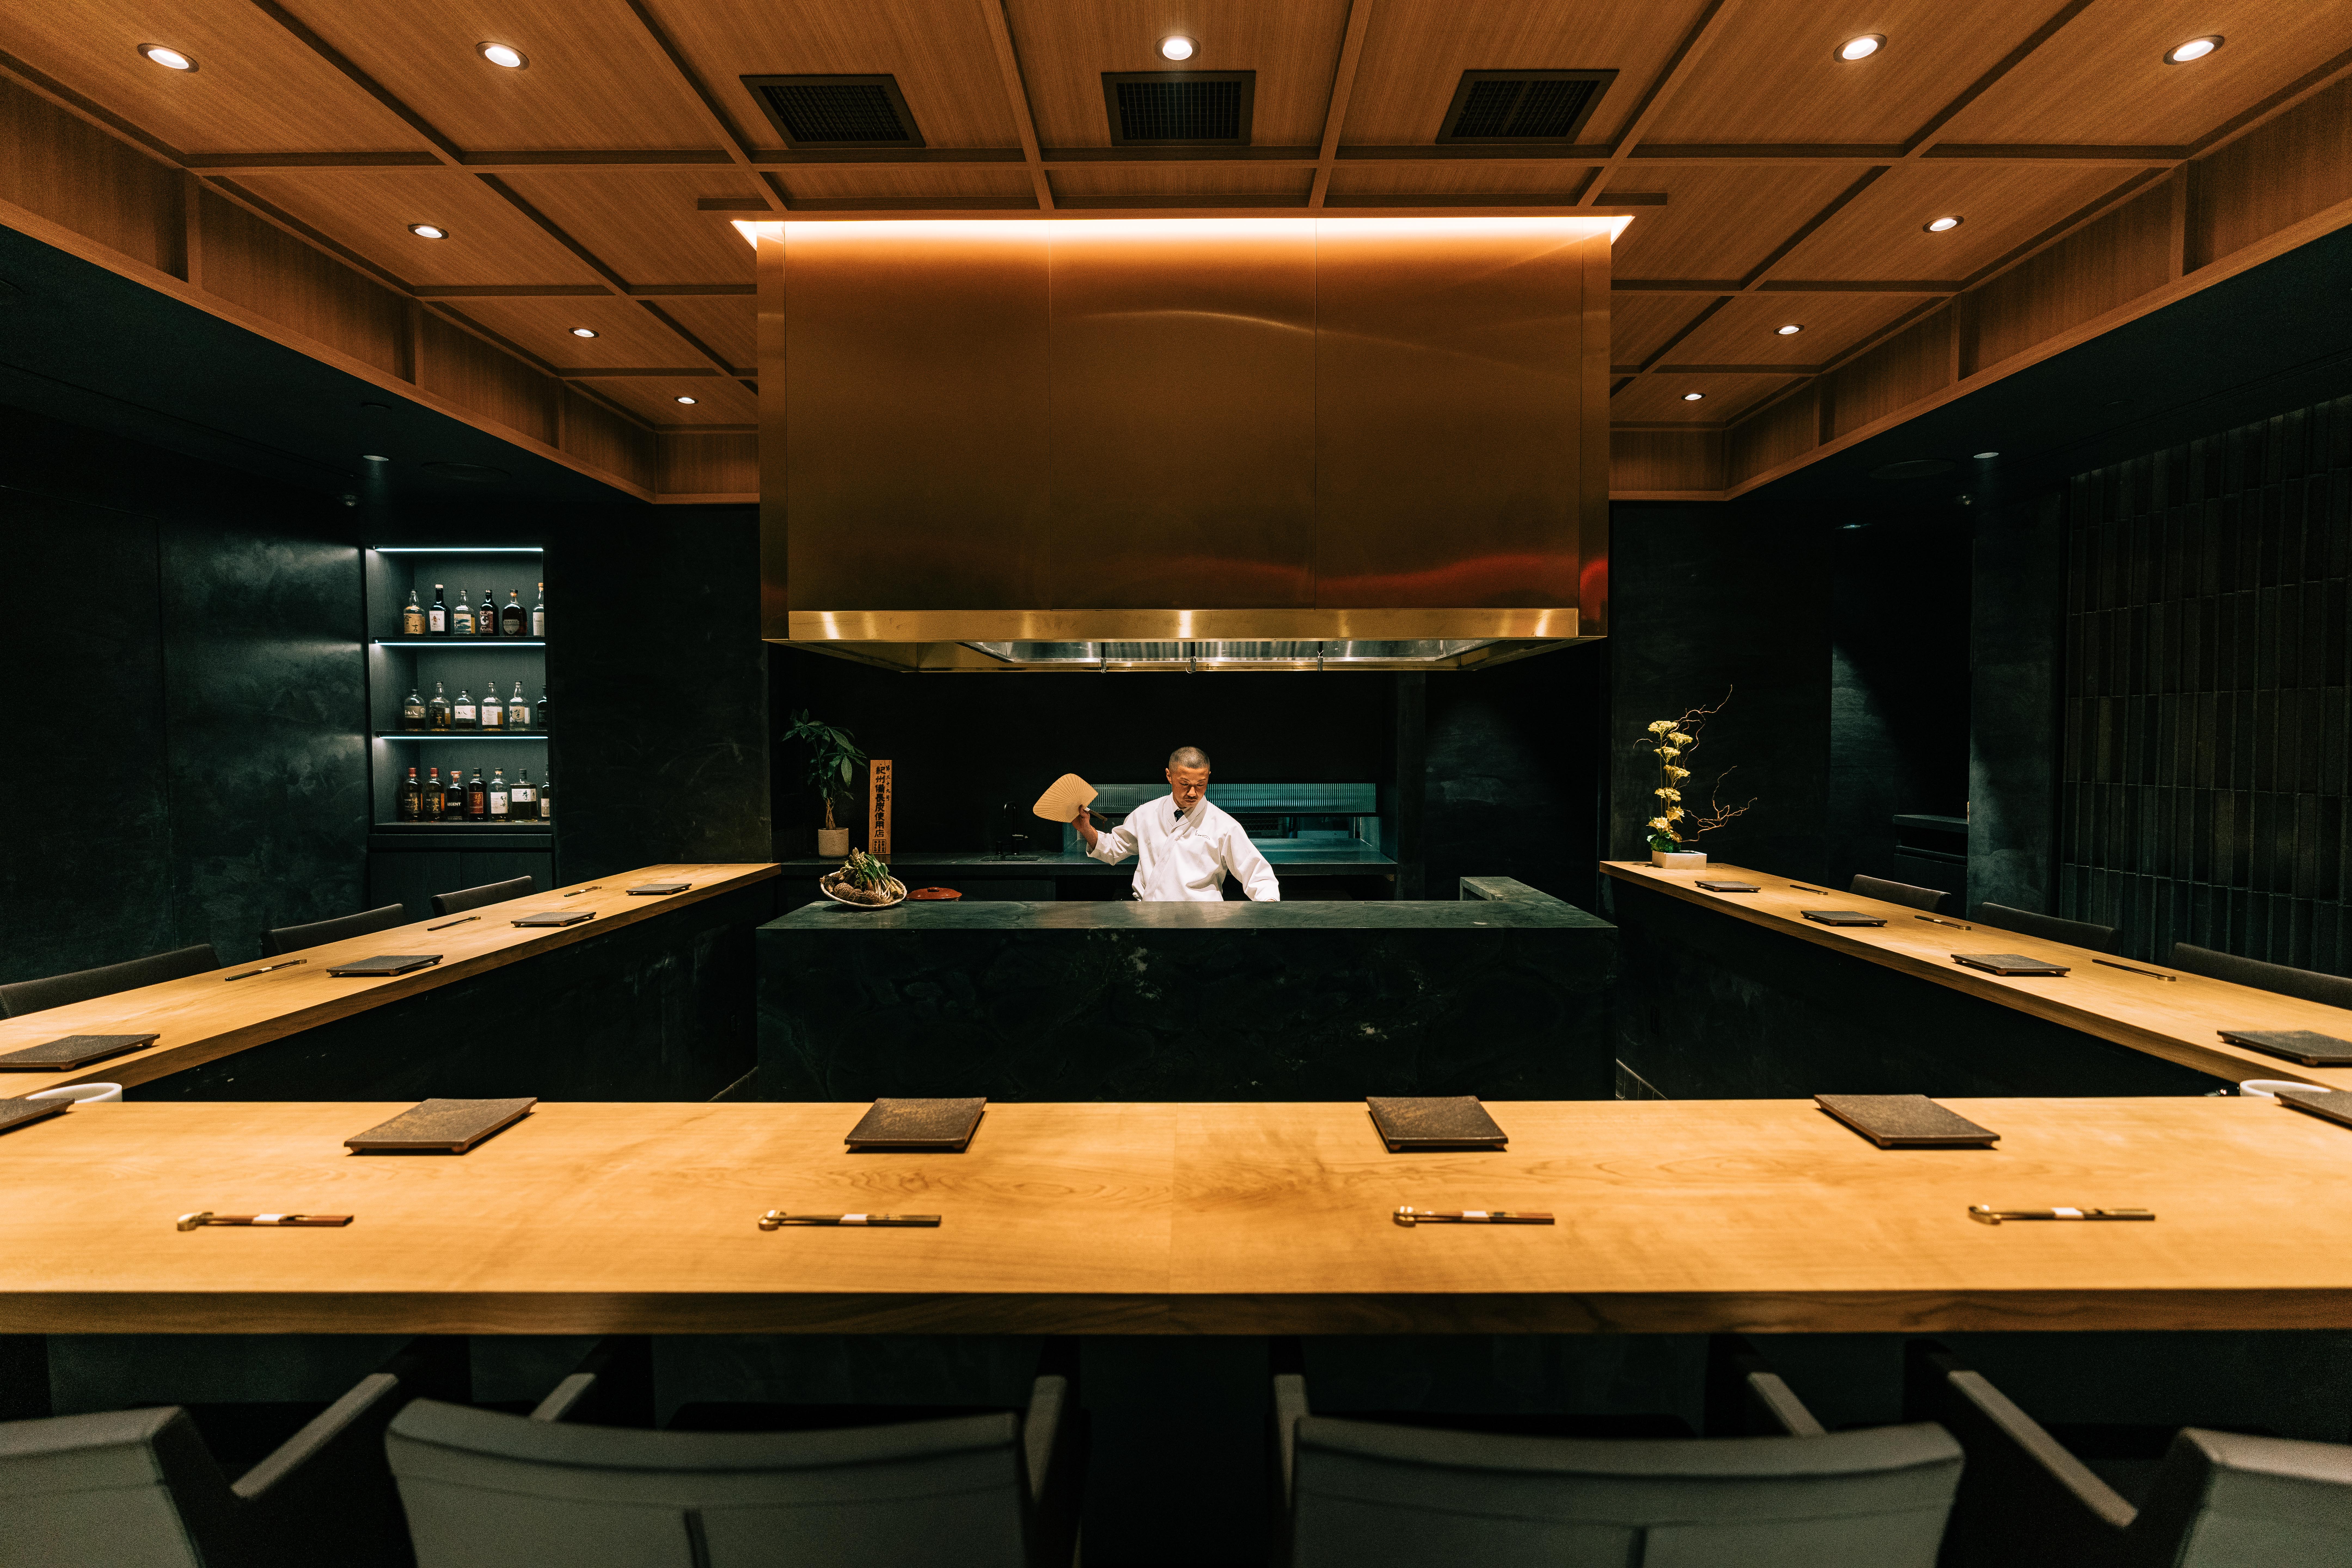 Chef Atsushi “ATS” Kono takes center stage inside the restaurant, which was modeled after traditional kabuki-style theaters.